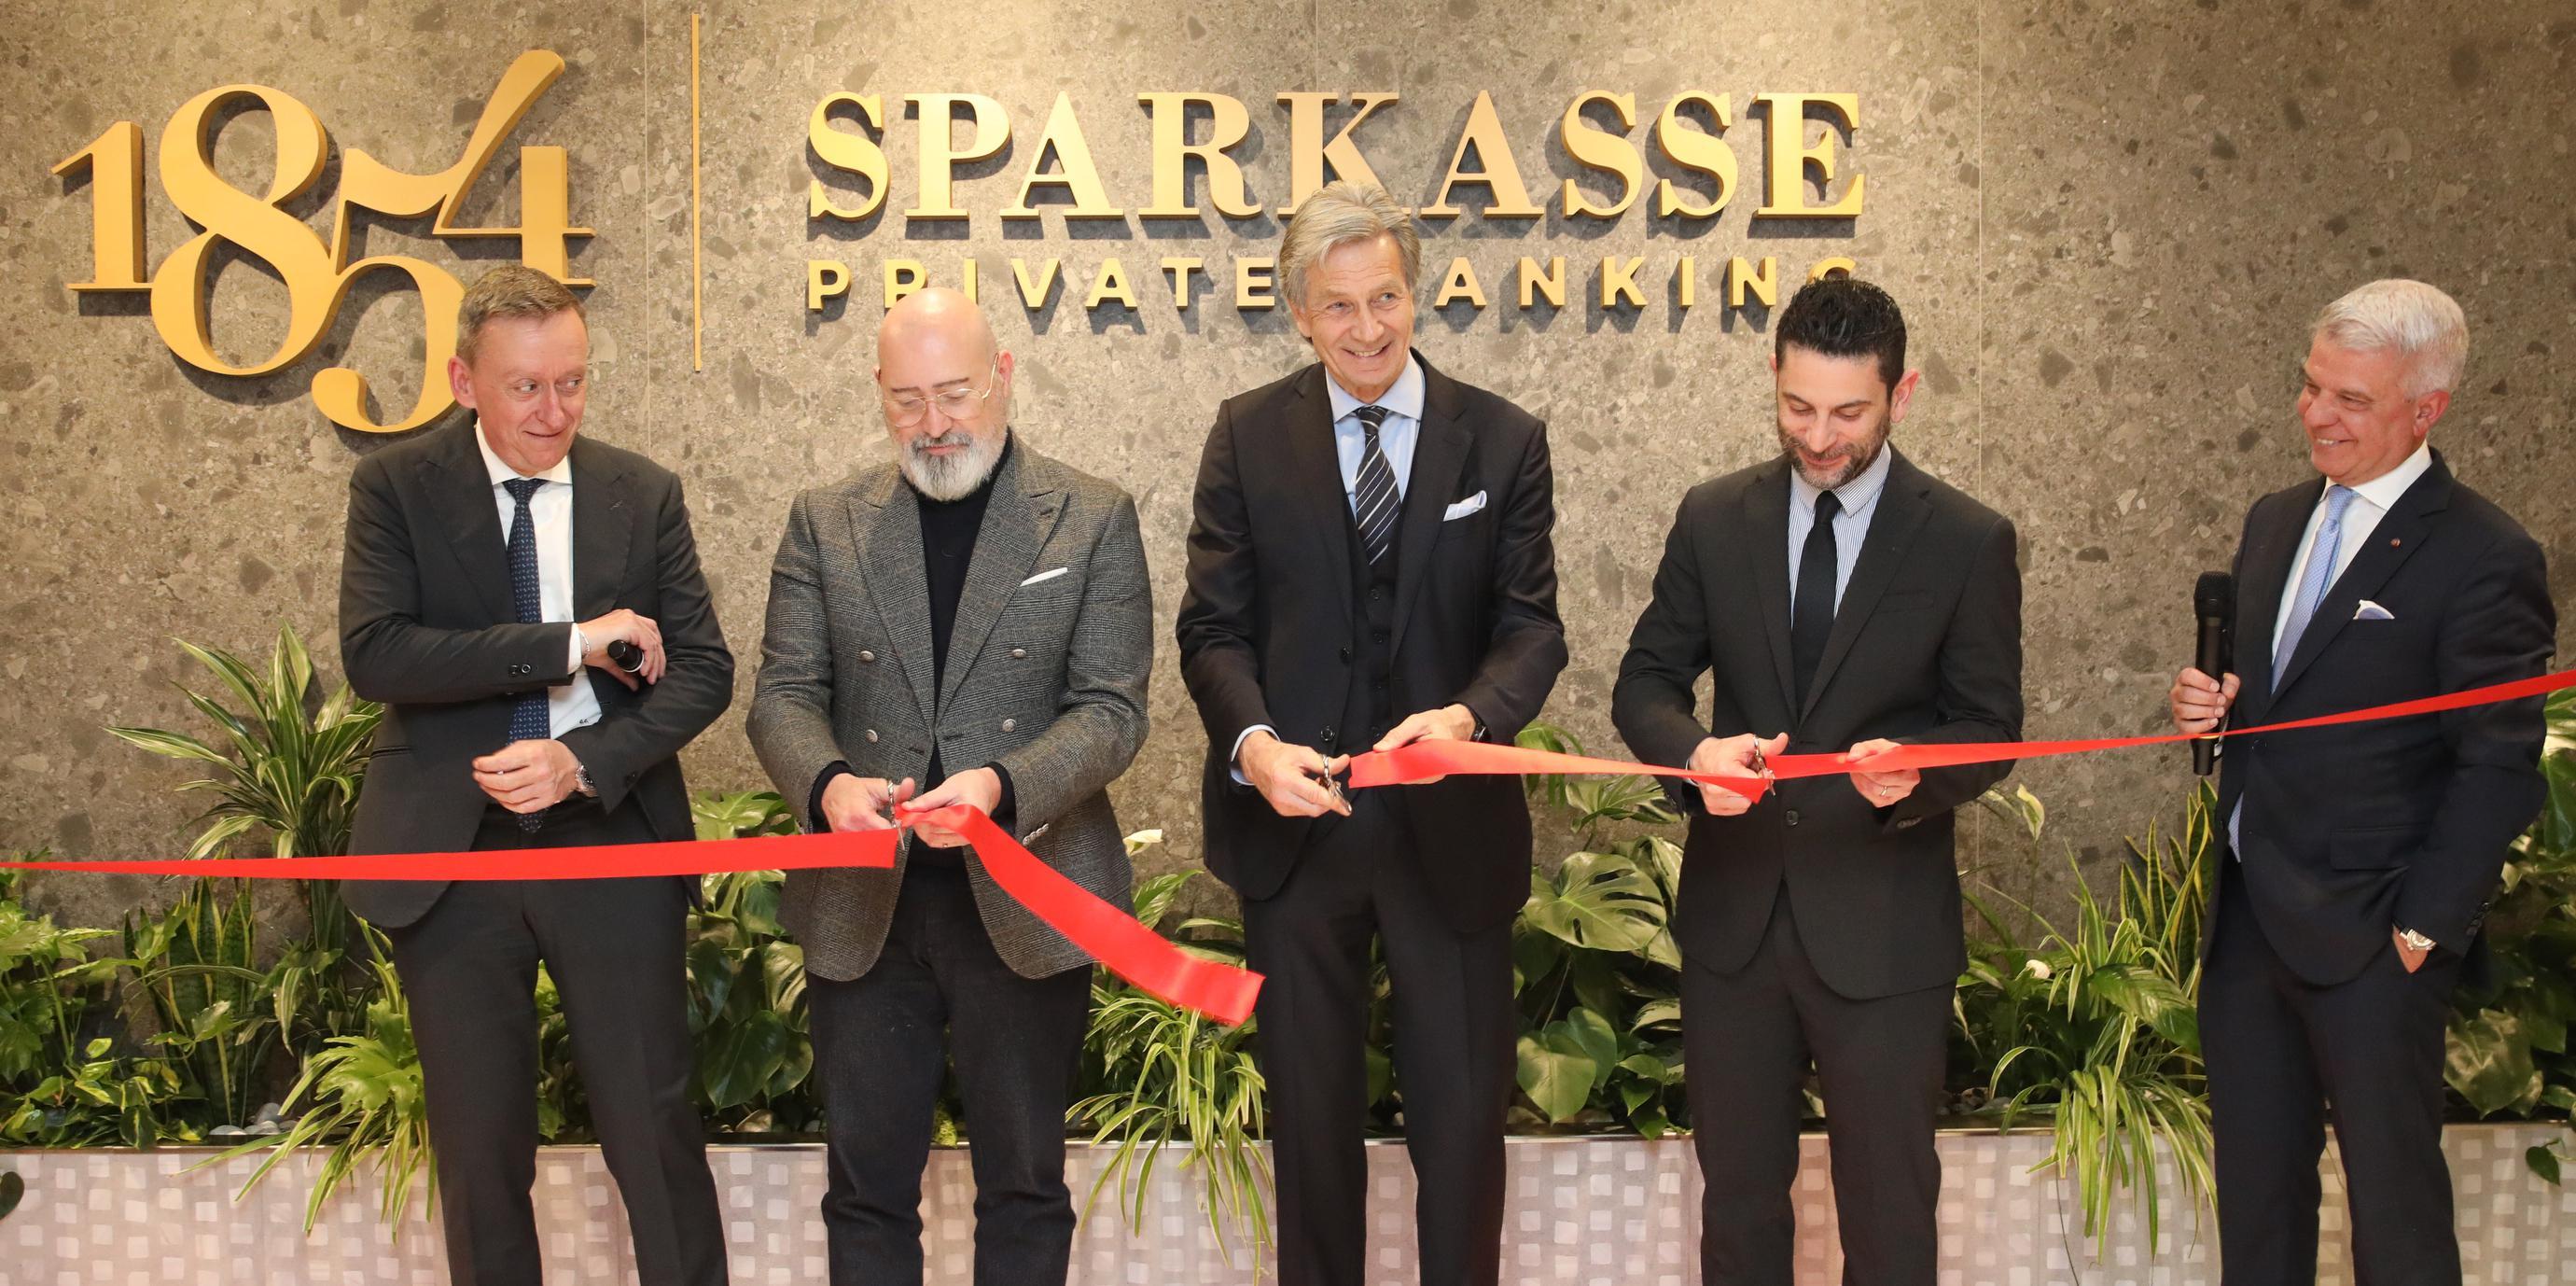 Sparkasse reaches the space of the towers, shared with Illumia